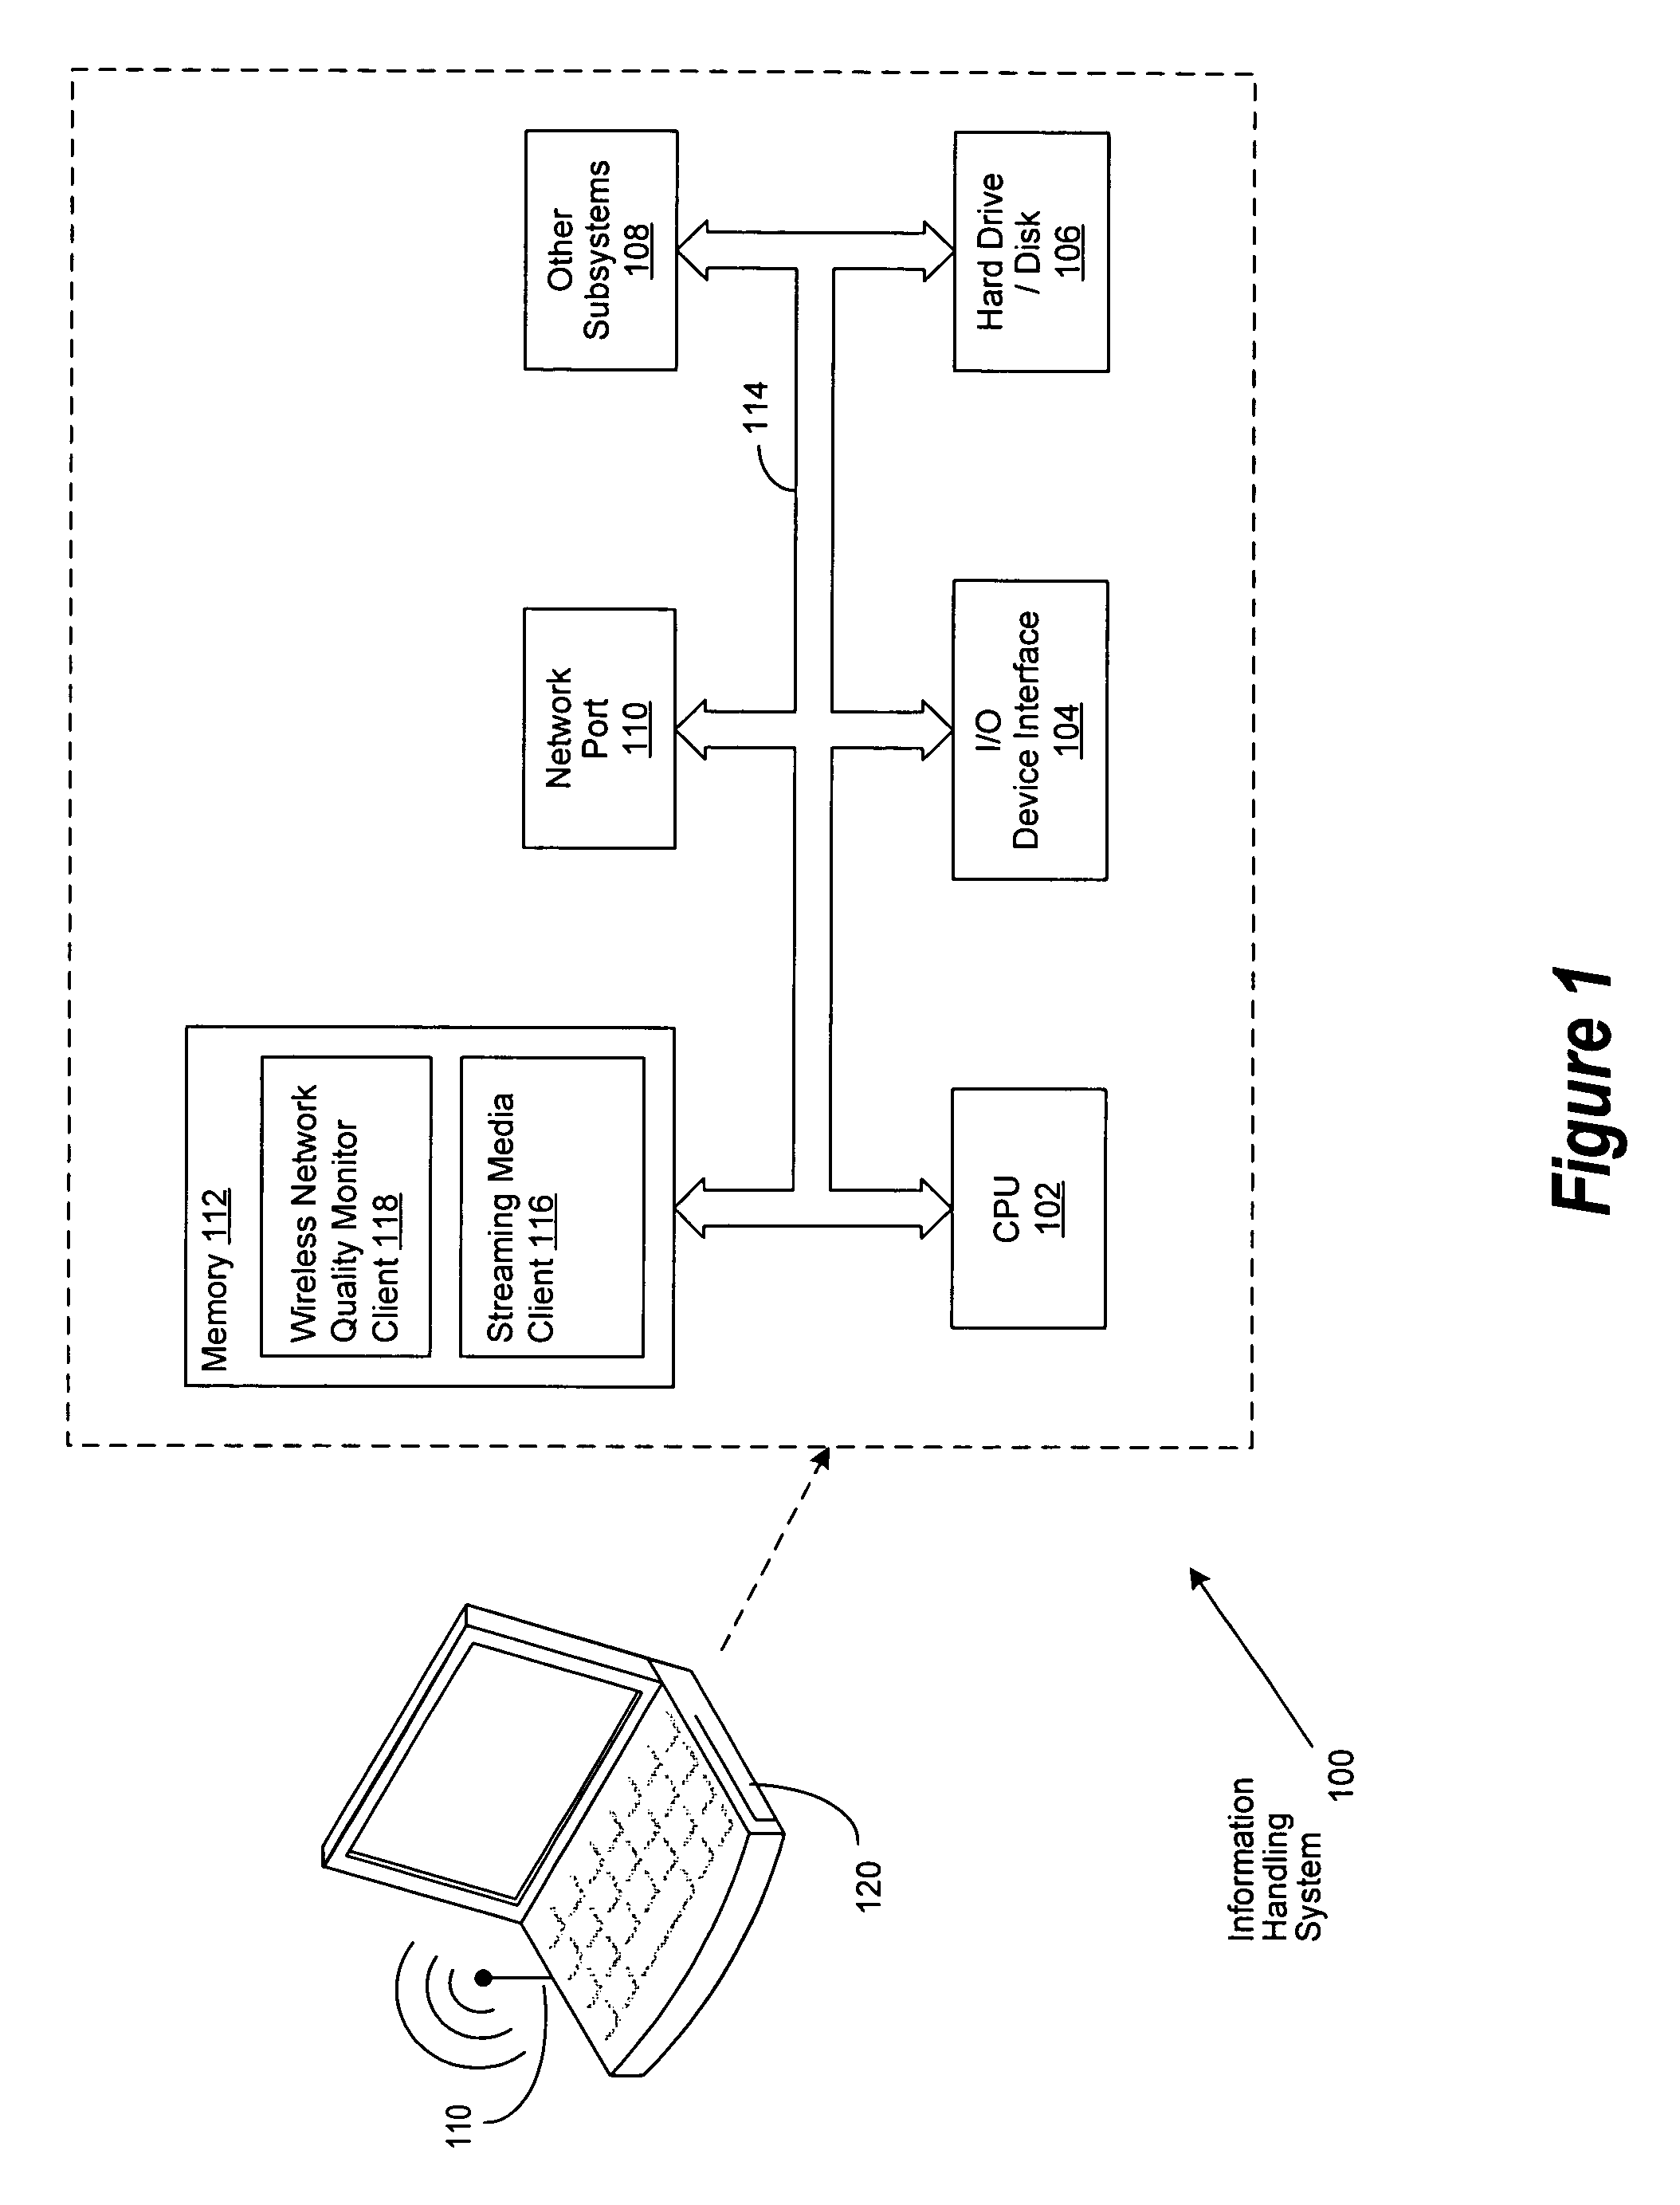 System and method to predict the performance of streaming media over wireless links